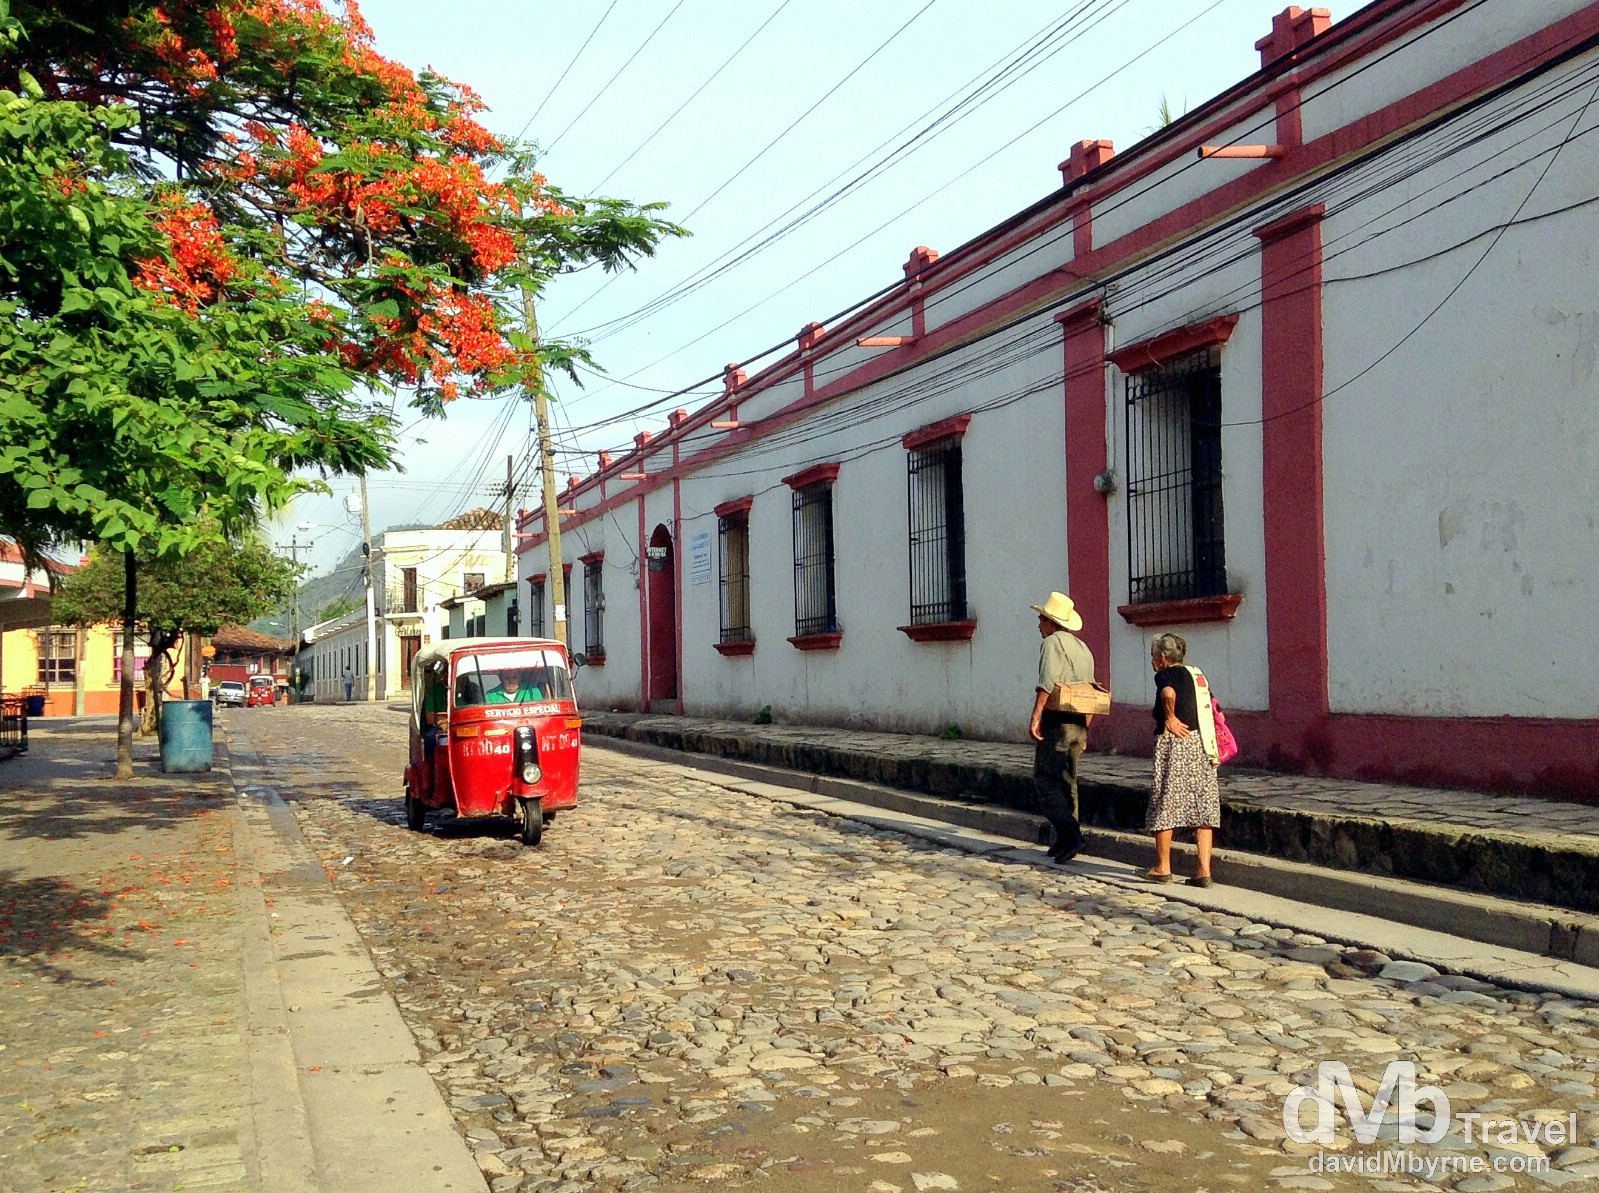 A tuk-tuk & early morning strollers (& shadows) on the cobbled streets of Copan Ruinas, western Honduras. June 8th 2013. (iPod)